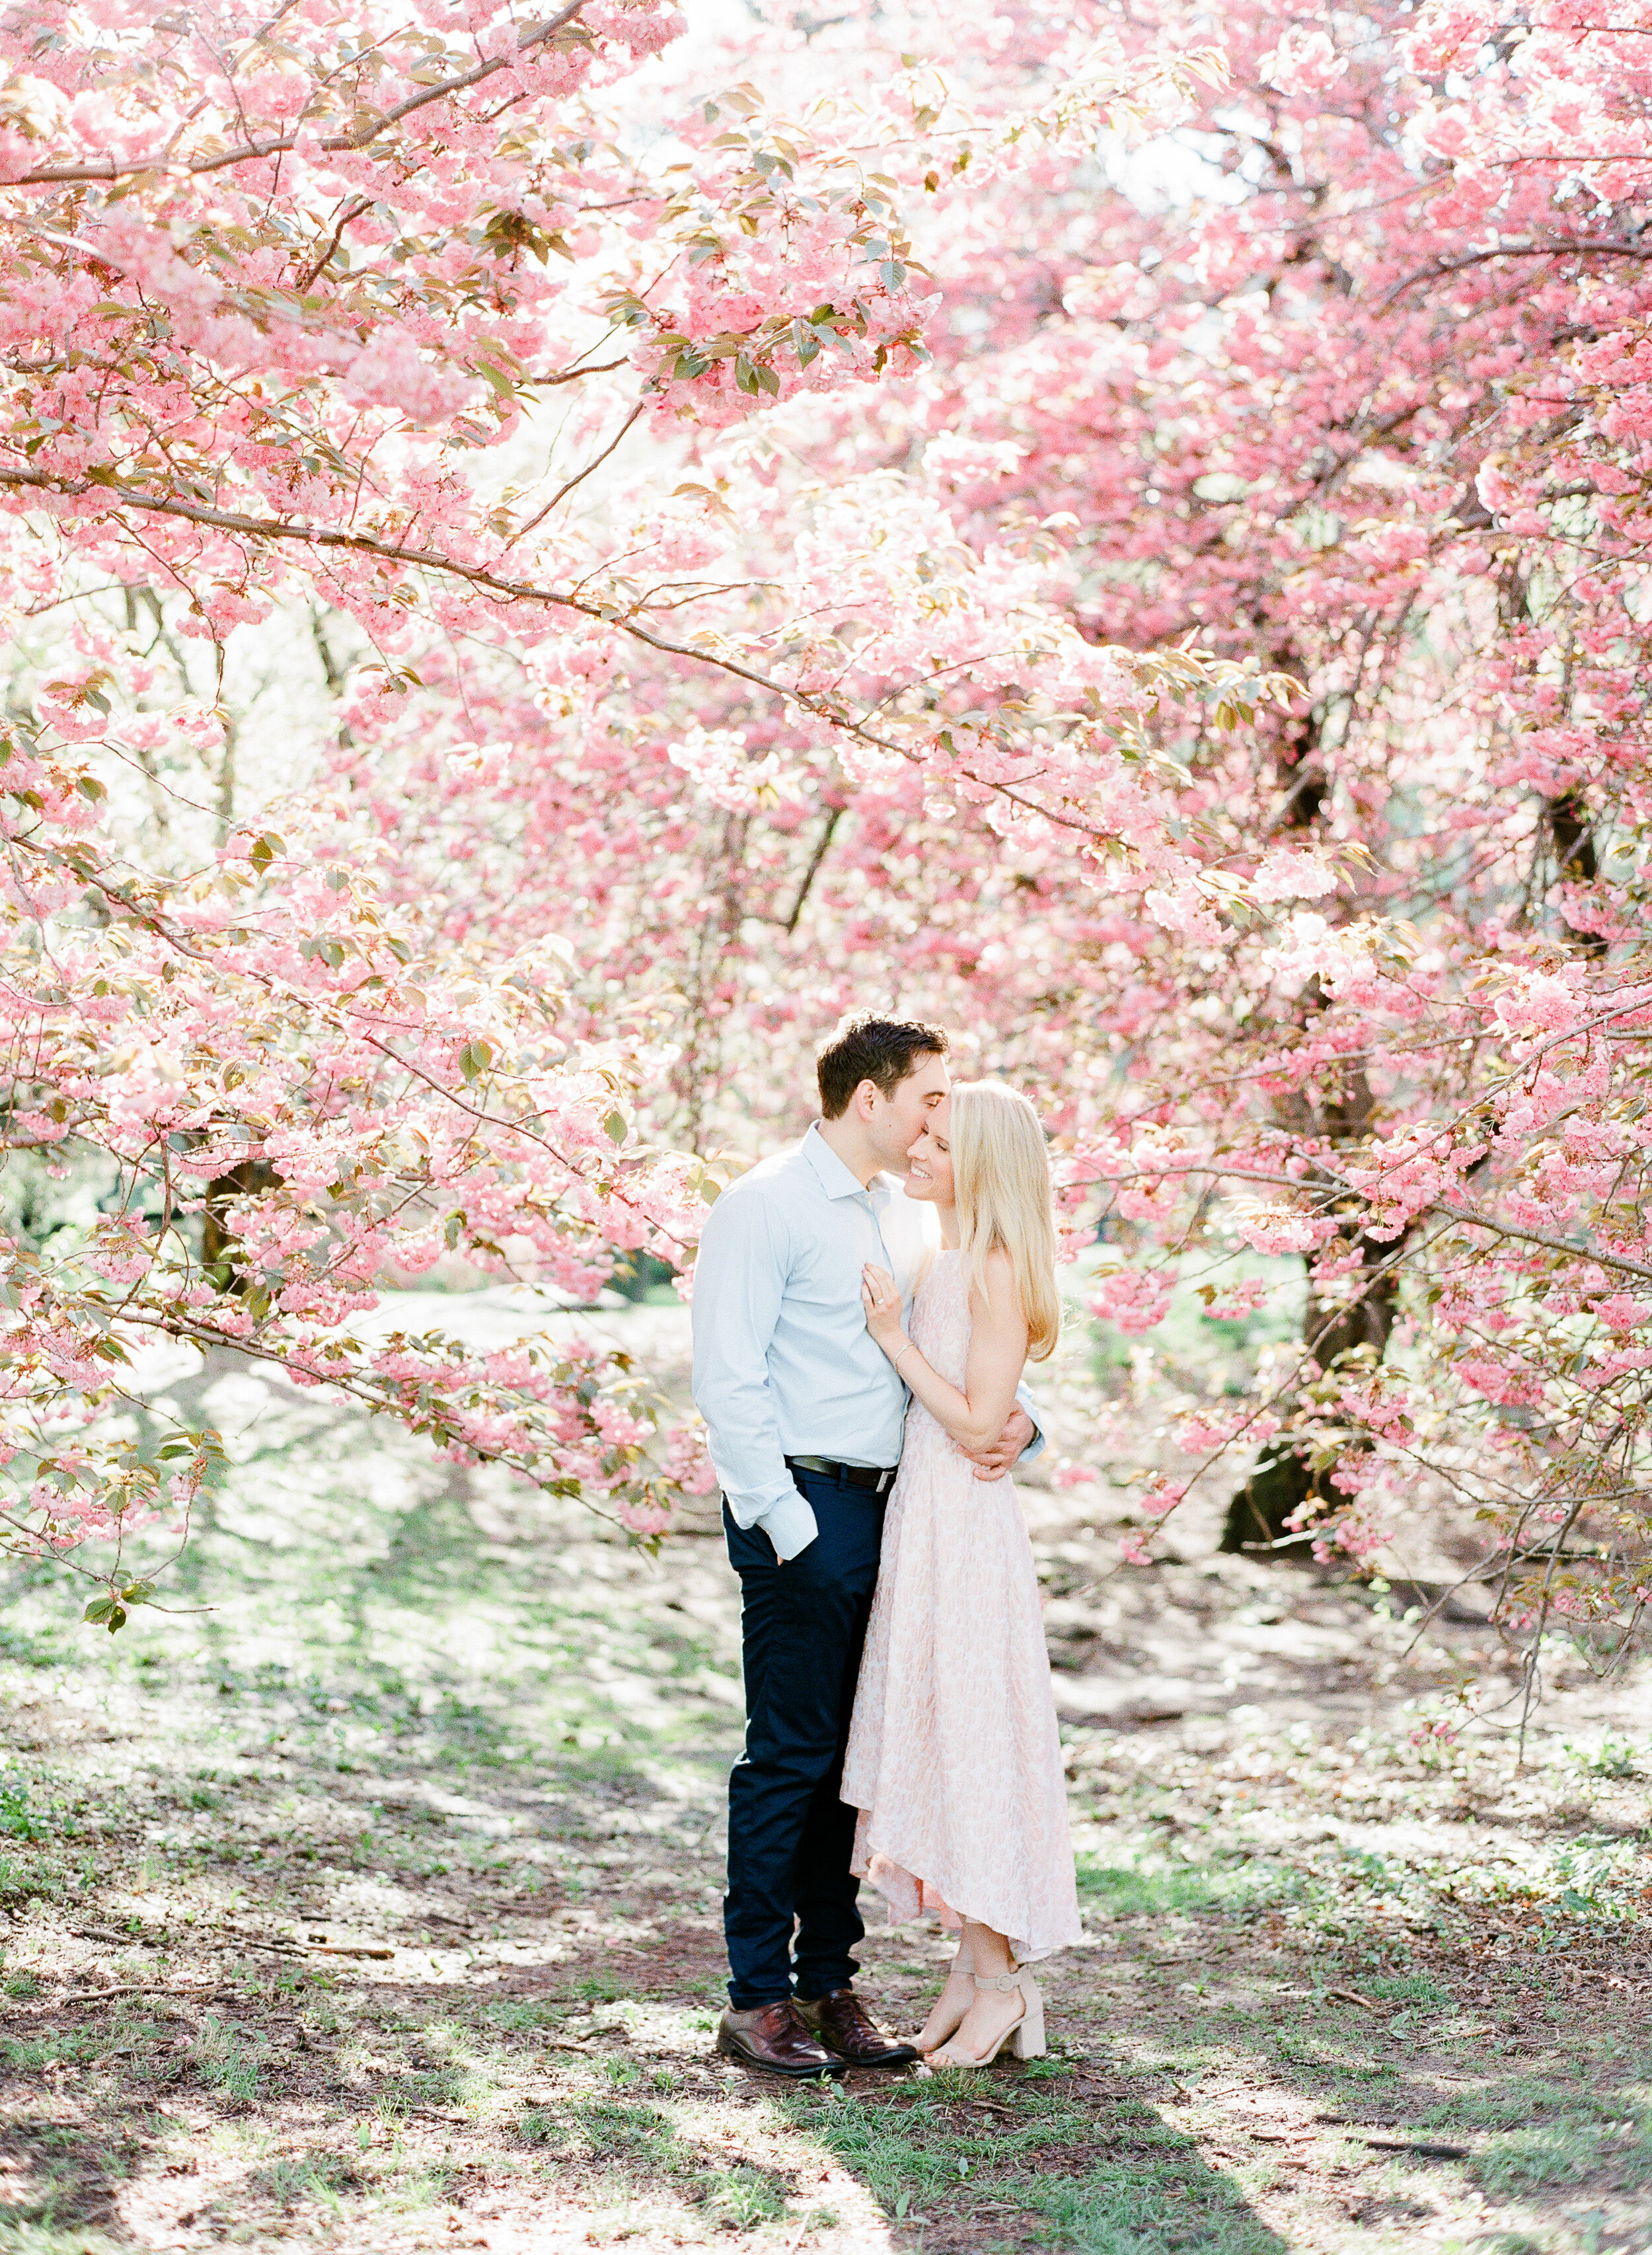 Cherry Blossom Engagement Photos in Central Park, NYC